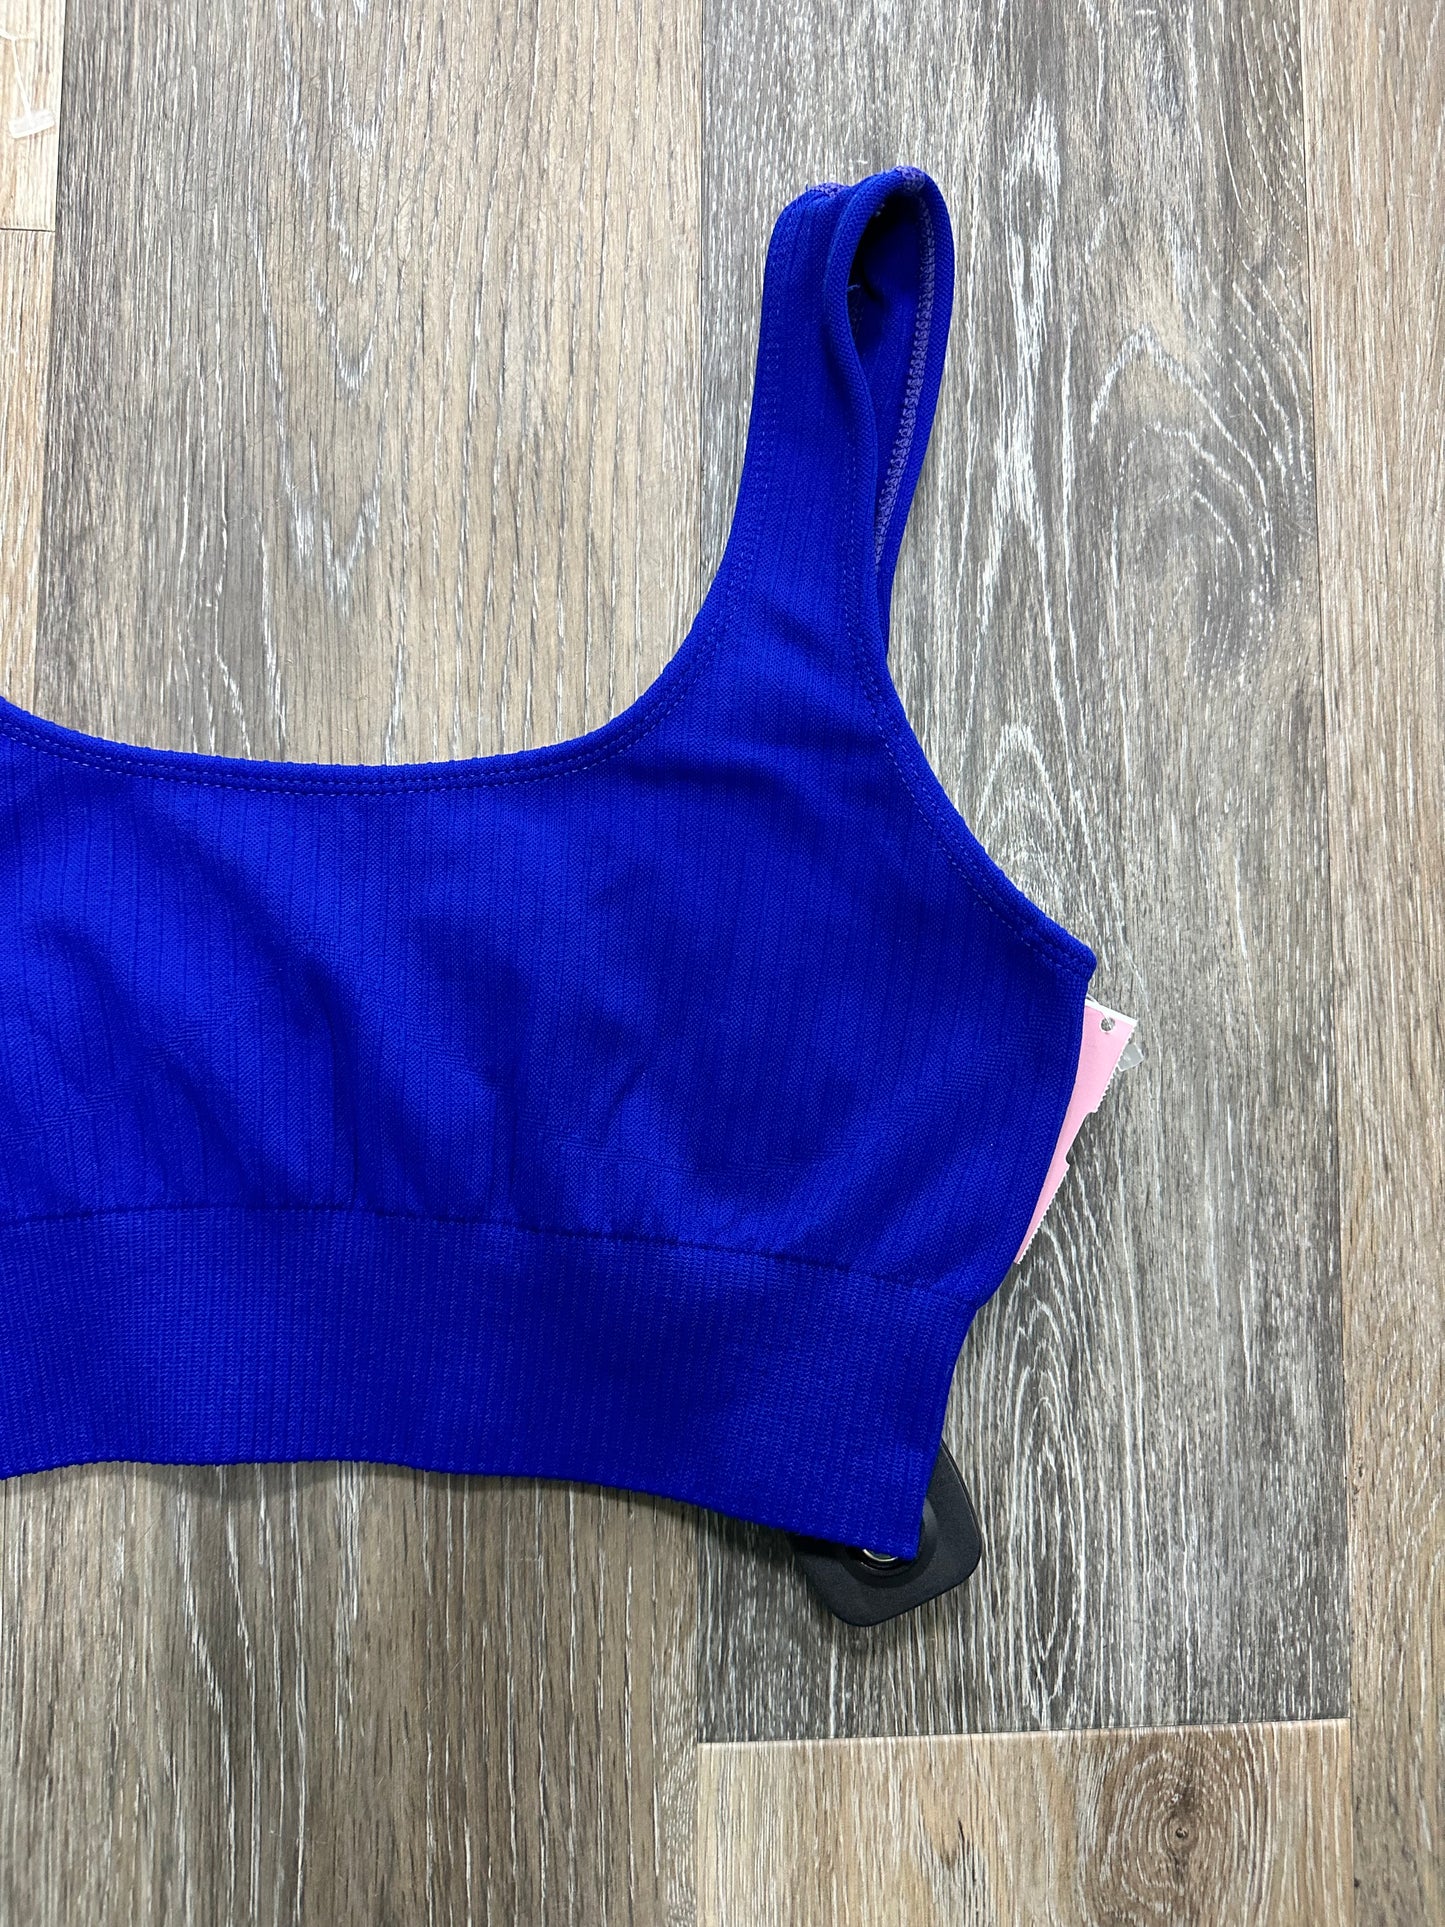 Athletic Bra By Cmc  Size: M